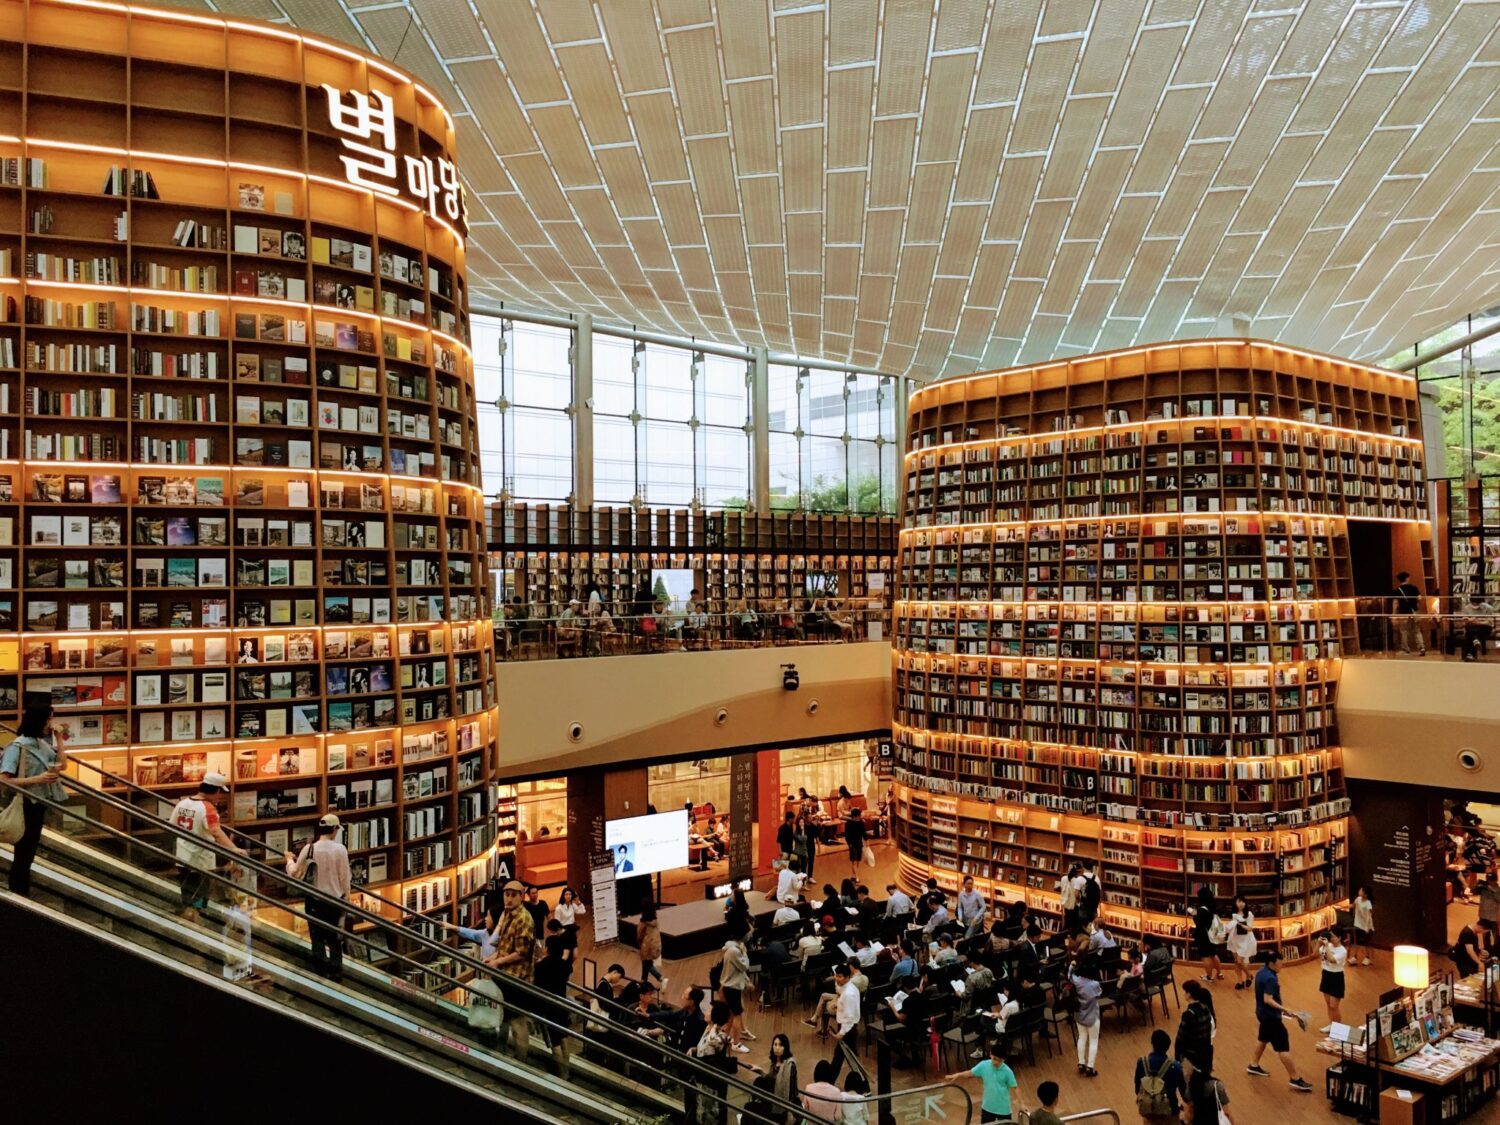 starfield library in seoul